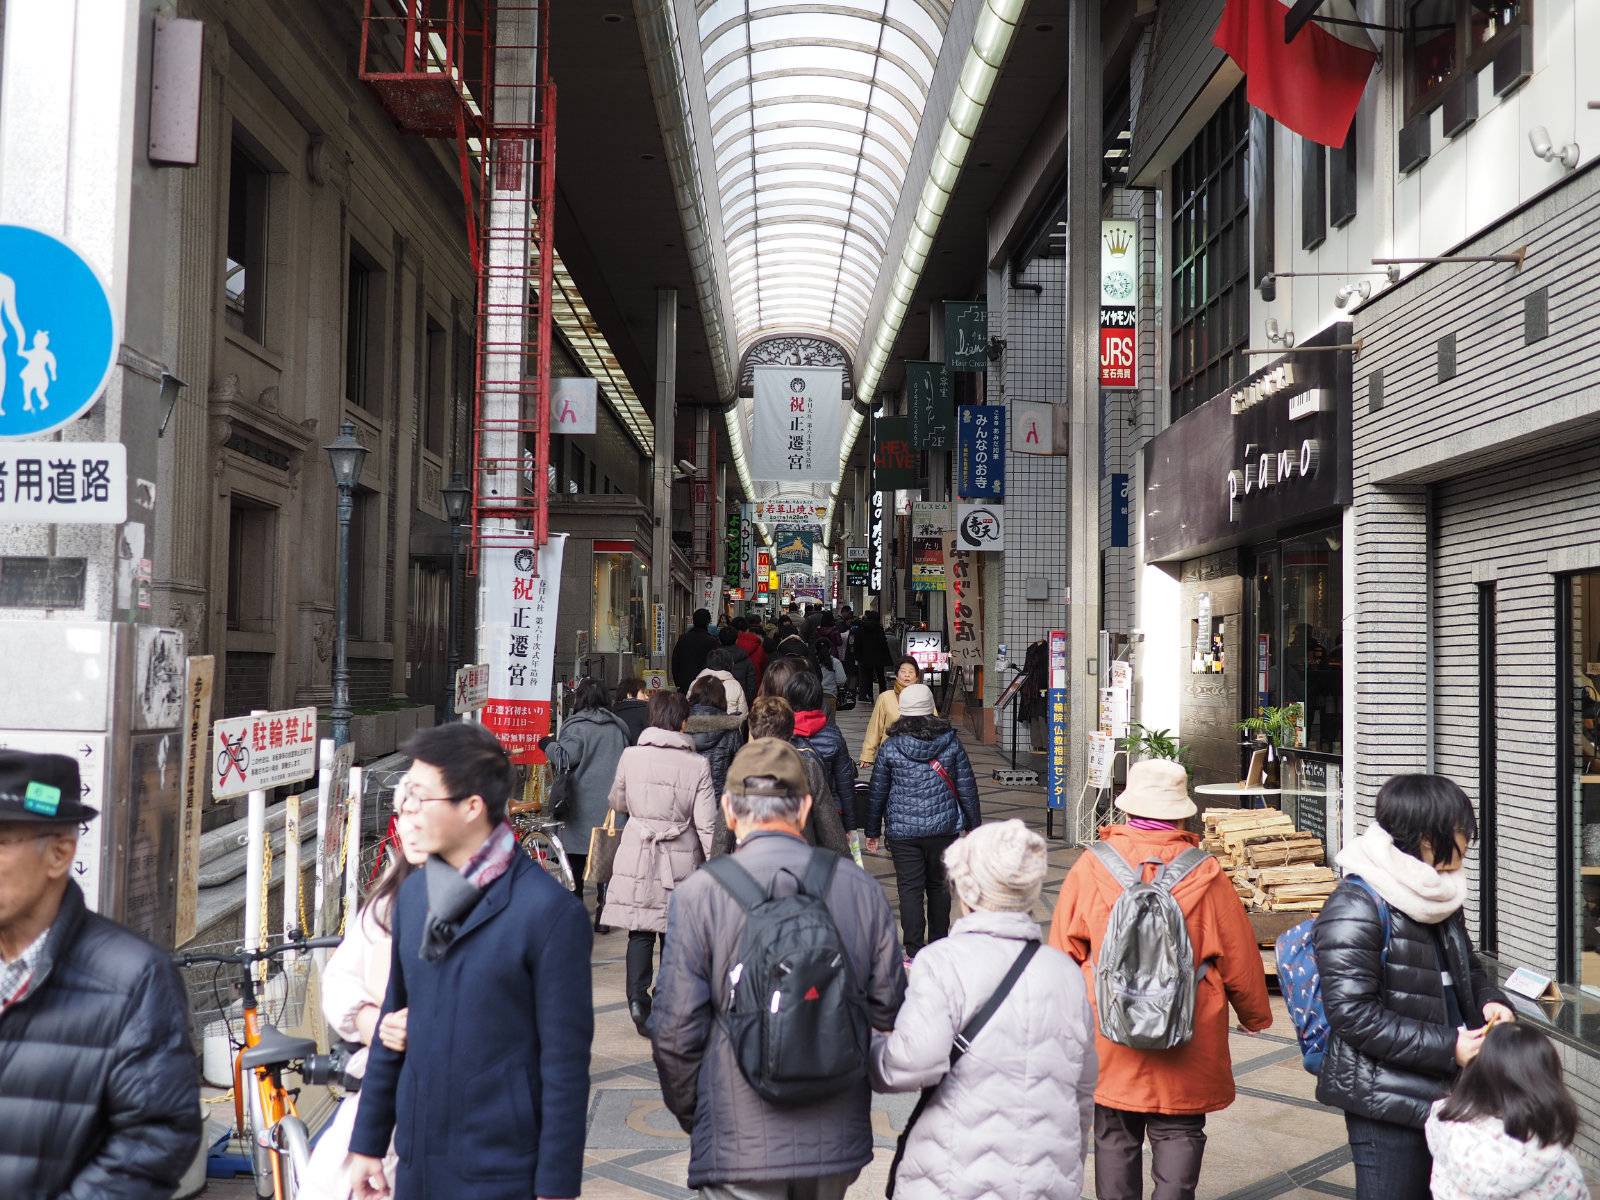 A bustling shopping alley